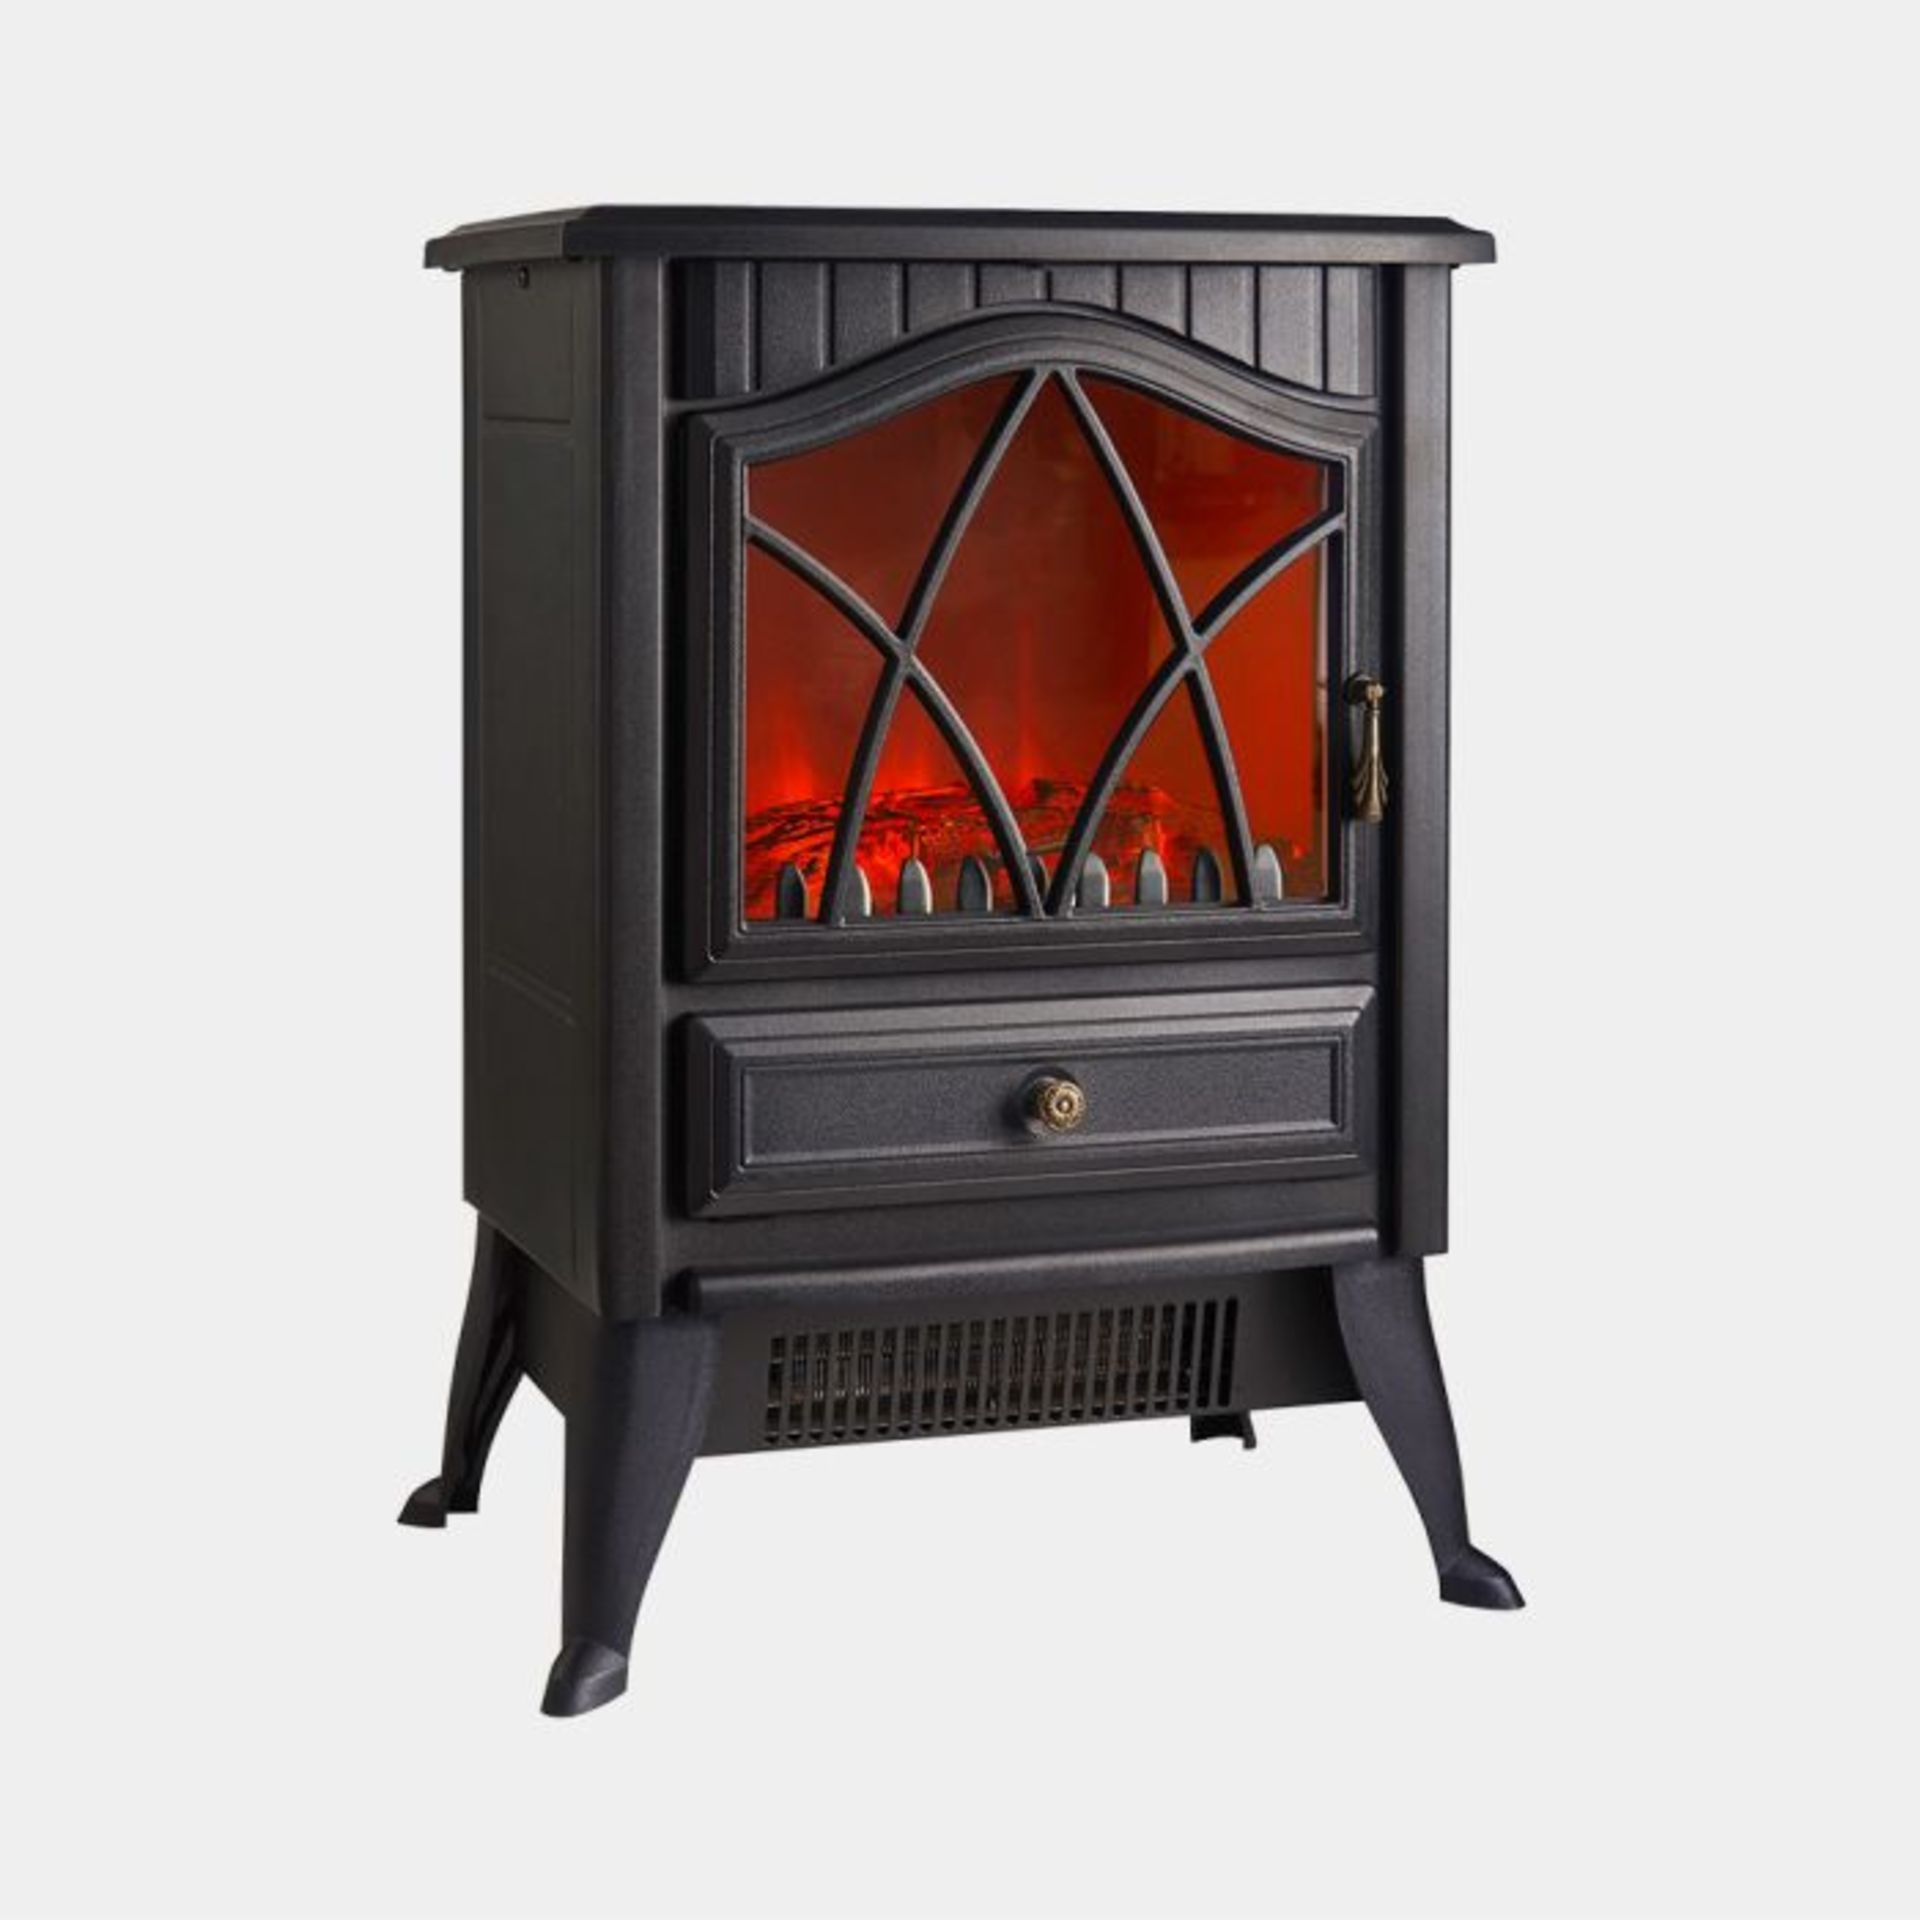 1850W Small Black Stove Heater. - ER36. The electric fire heats rooms up to 17m² and benefits from